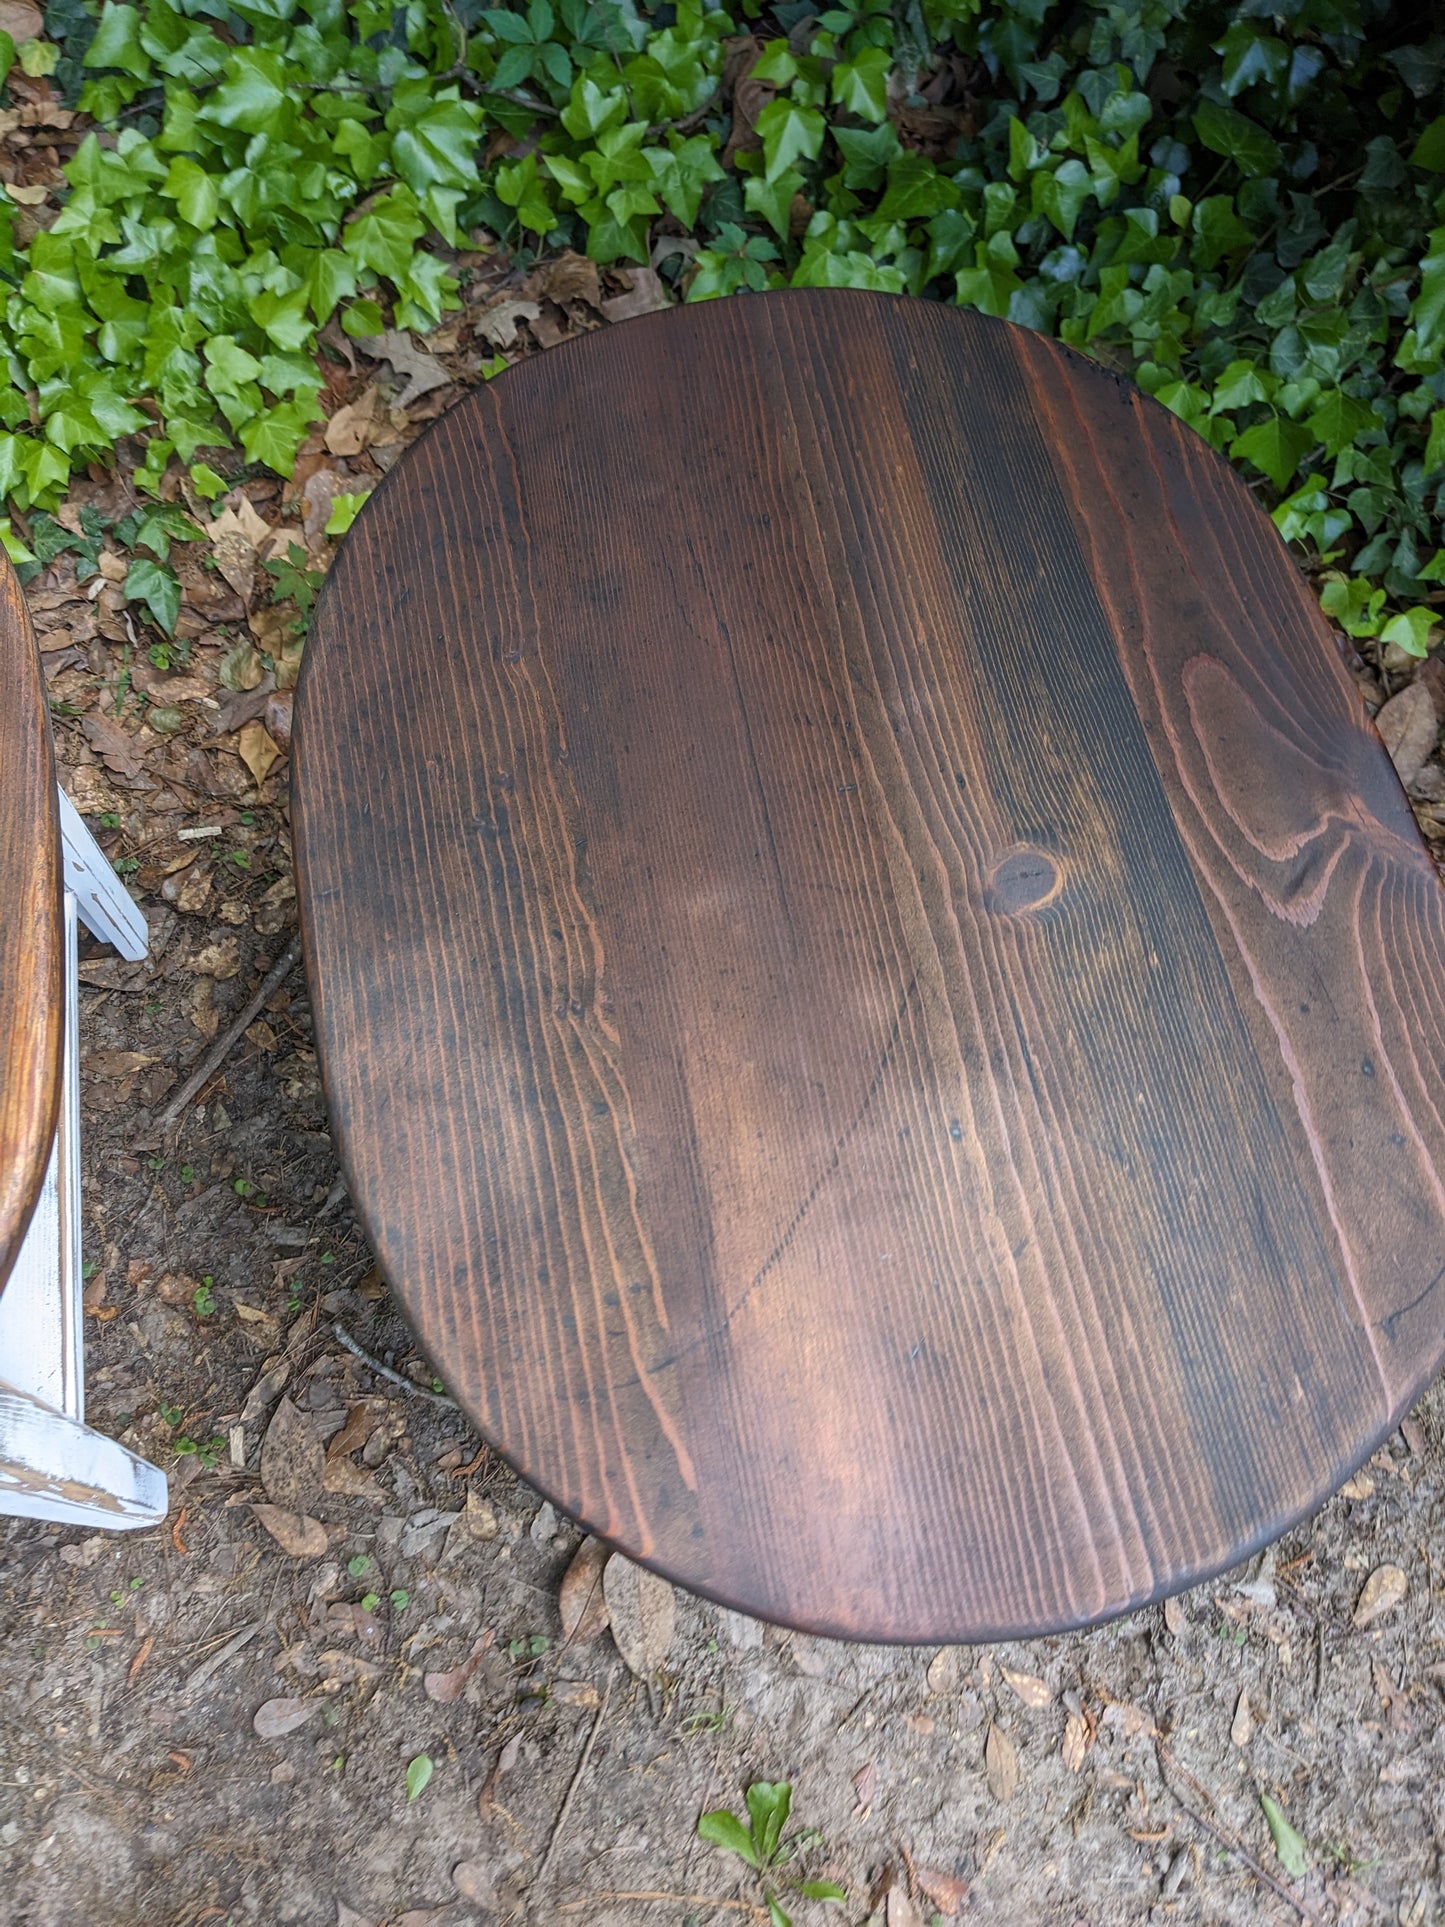 Oval End Tables